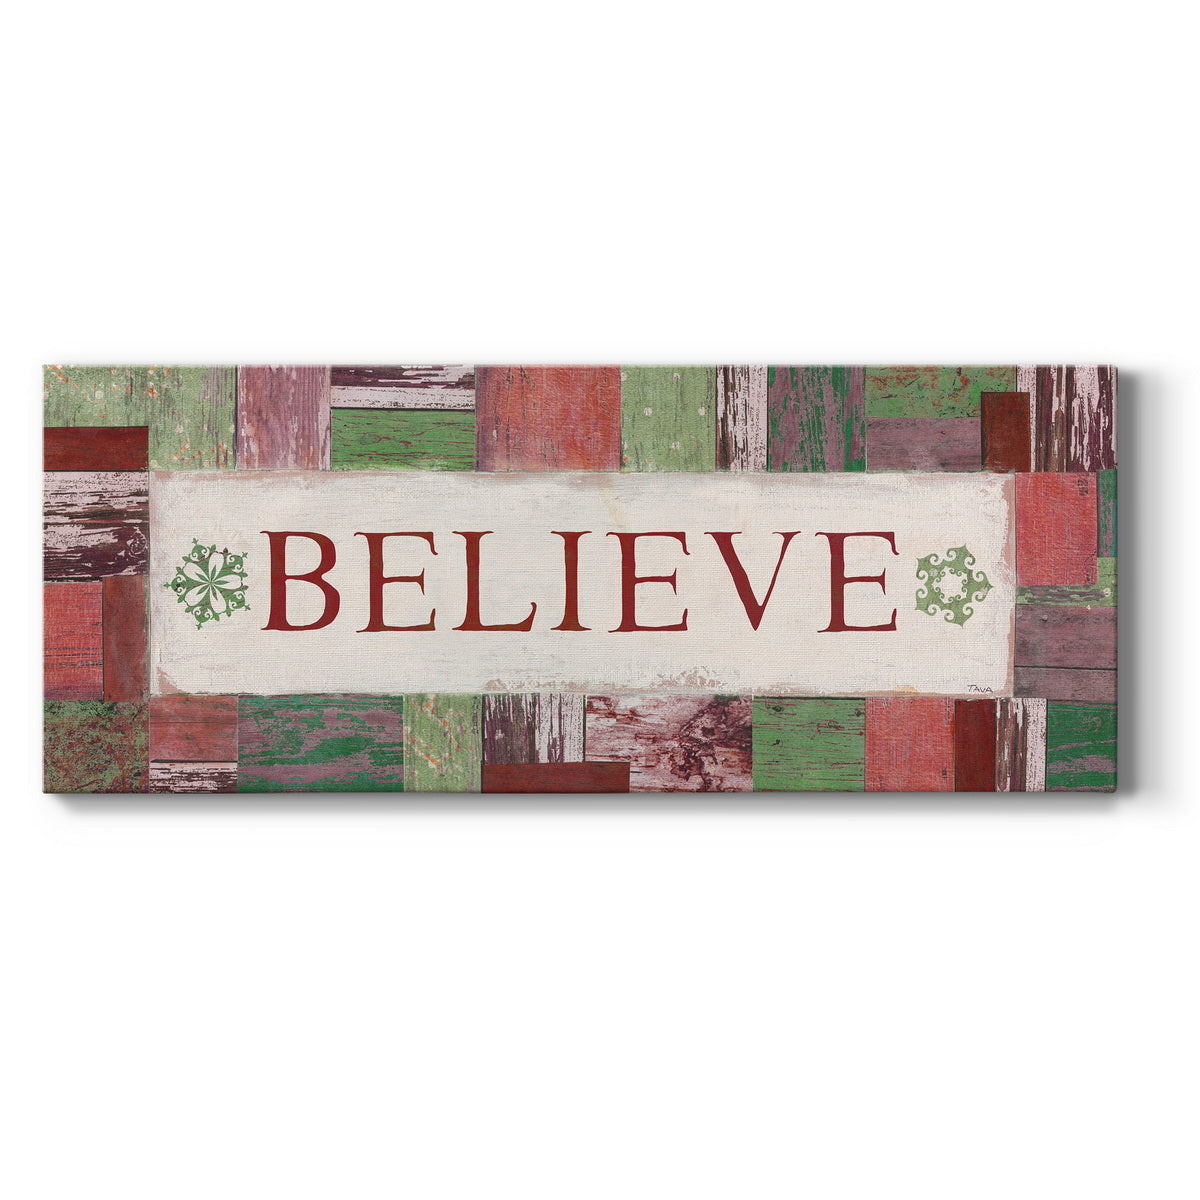 Believe Premium Gallery Wrapped Canvas - Ready to Hang